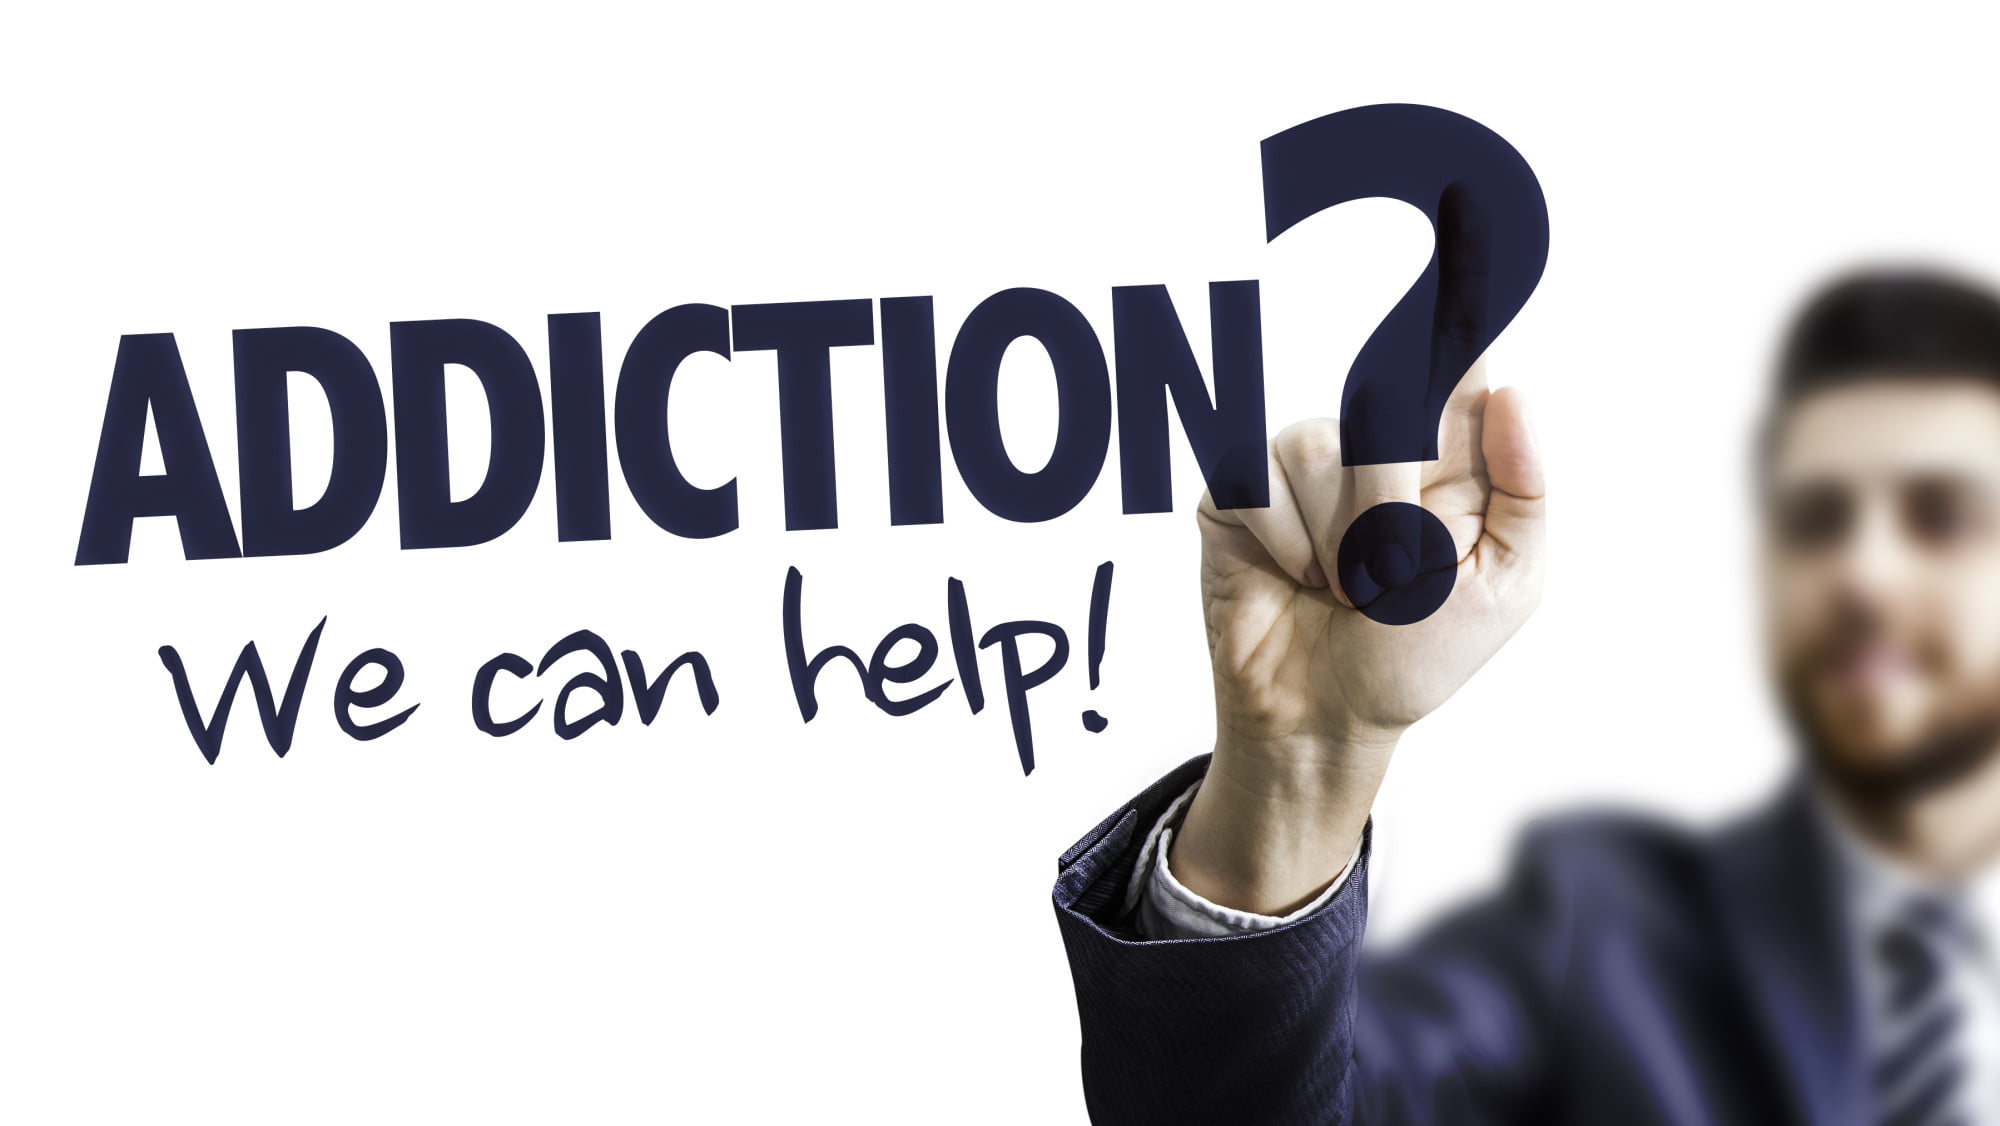 Finding the right facility to treat your addiction requires knowing your options. Here are factors to consider when picking addiction treatment centers.